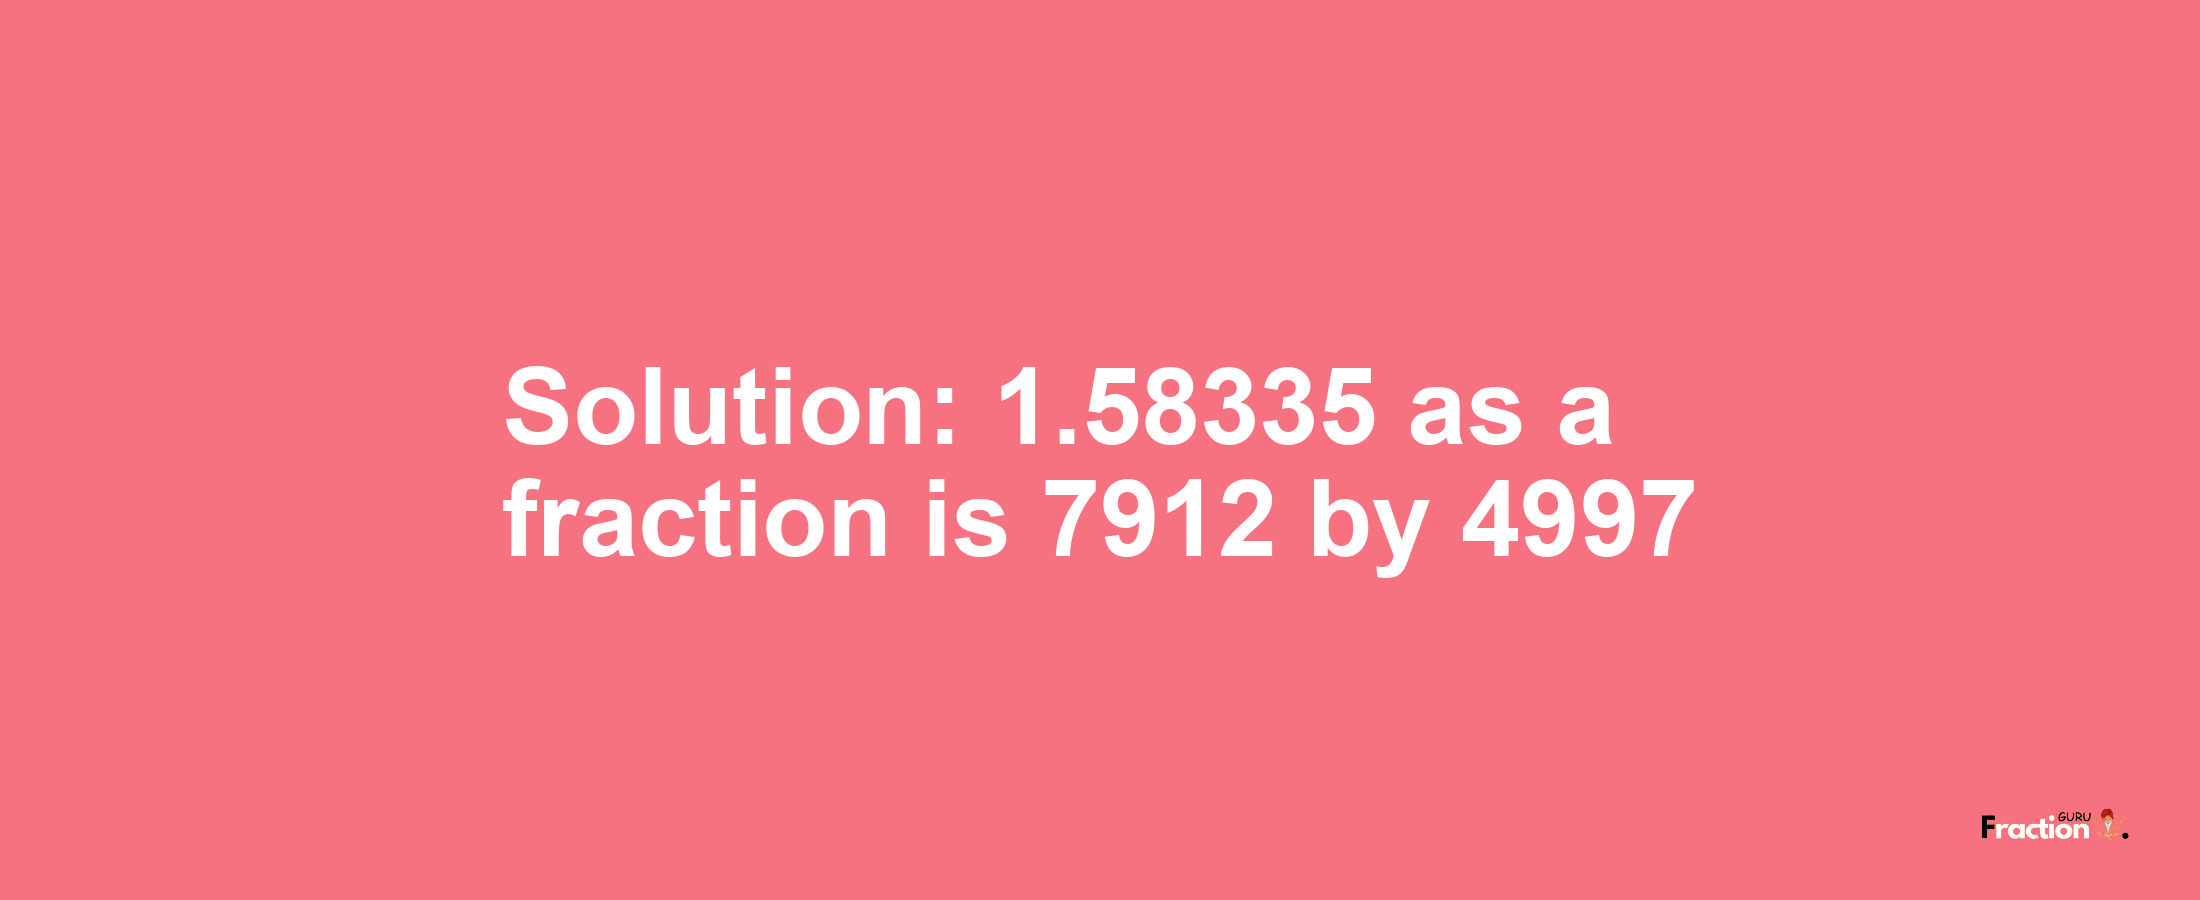 Solution:1.58335 as a fraction is 7912/4997